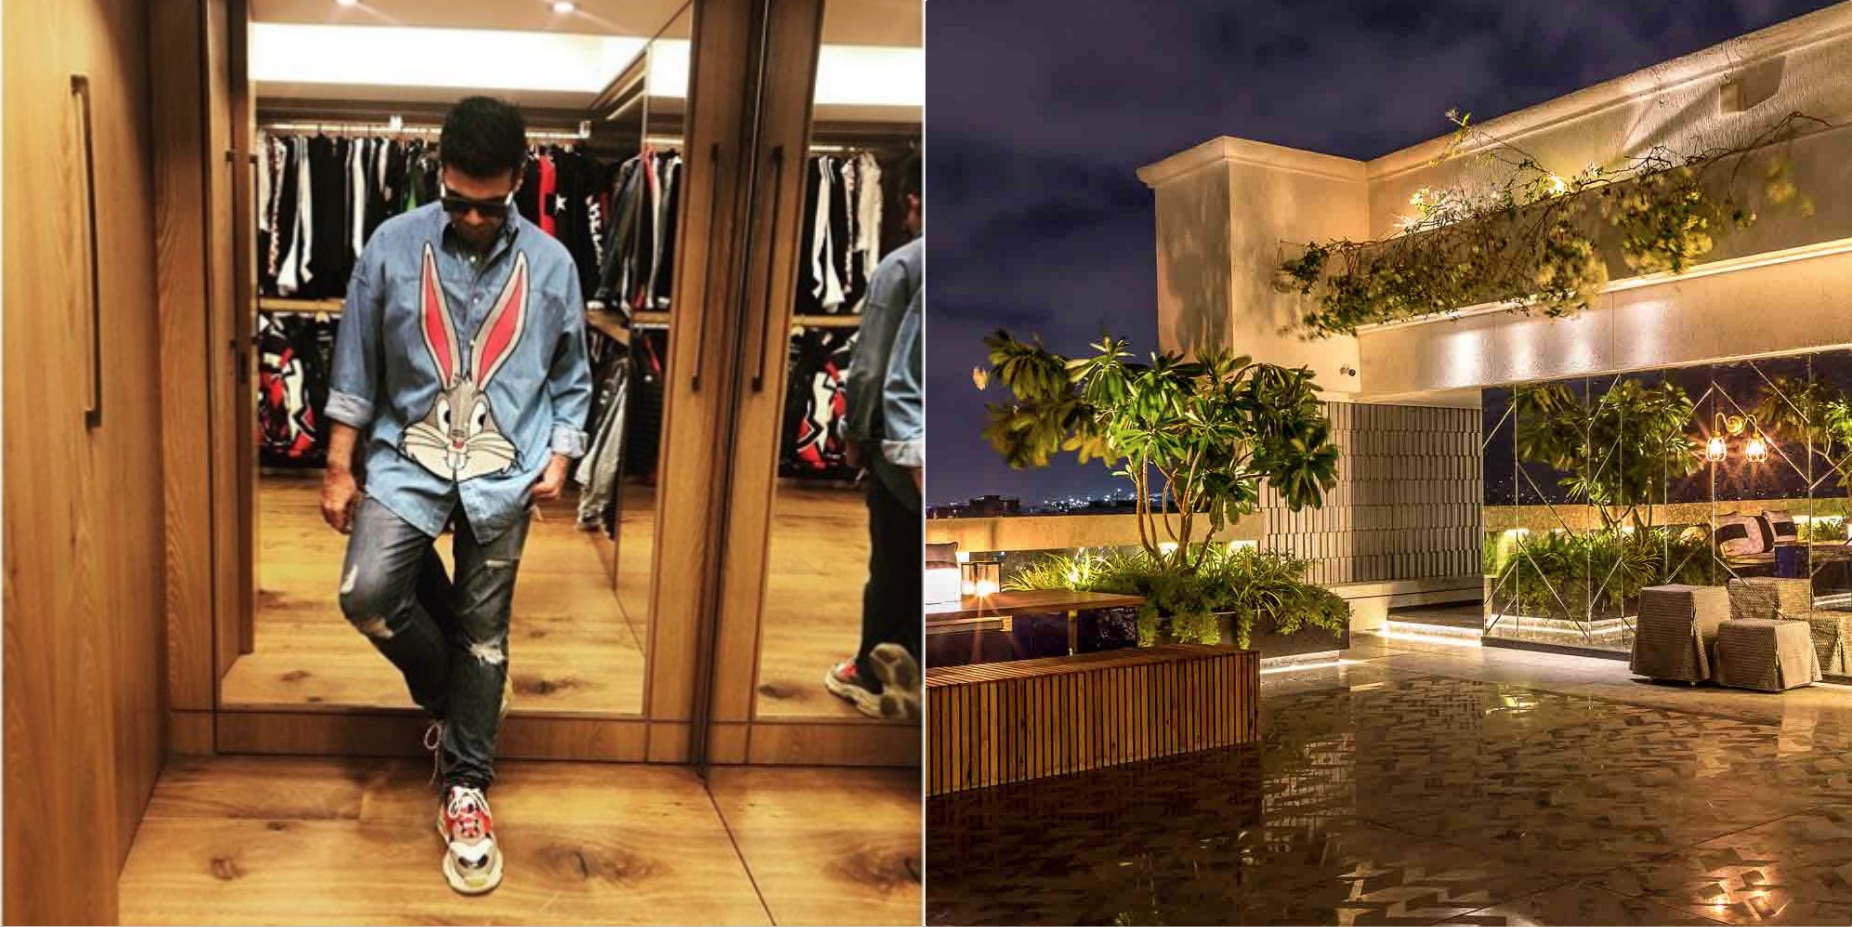 15 Inside Photos From Karan Johar's House That Will Give You Some *Serious*  Style Inspo - Celebrity, Cosmopolitan India